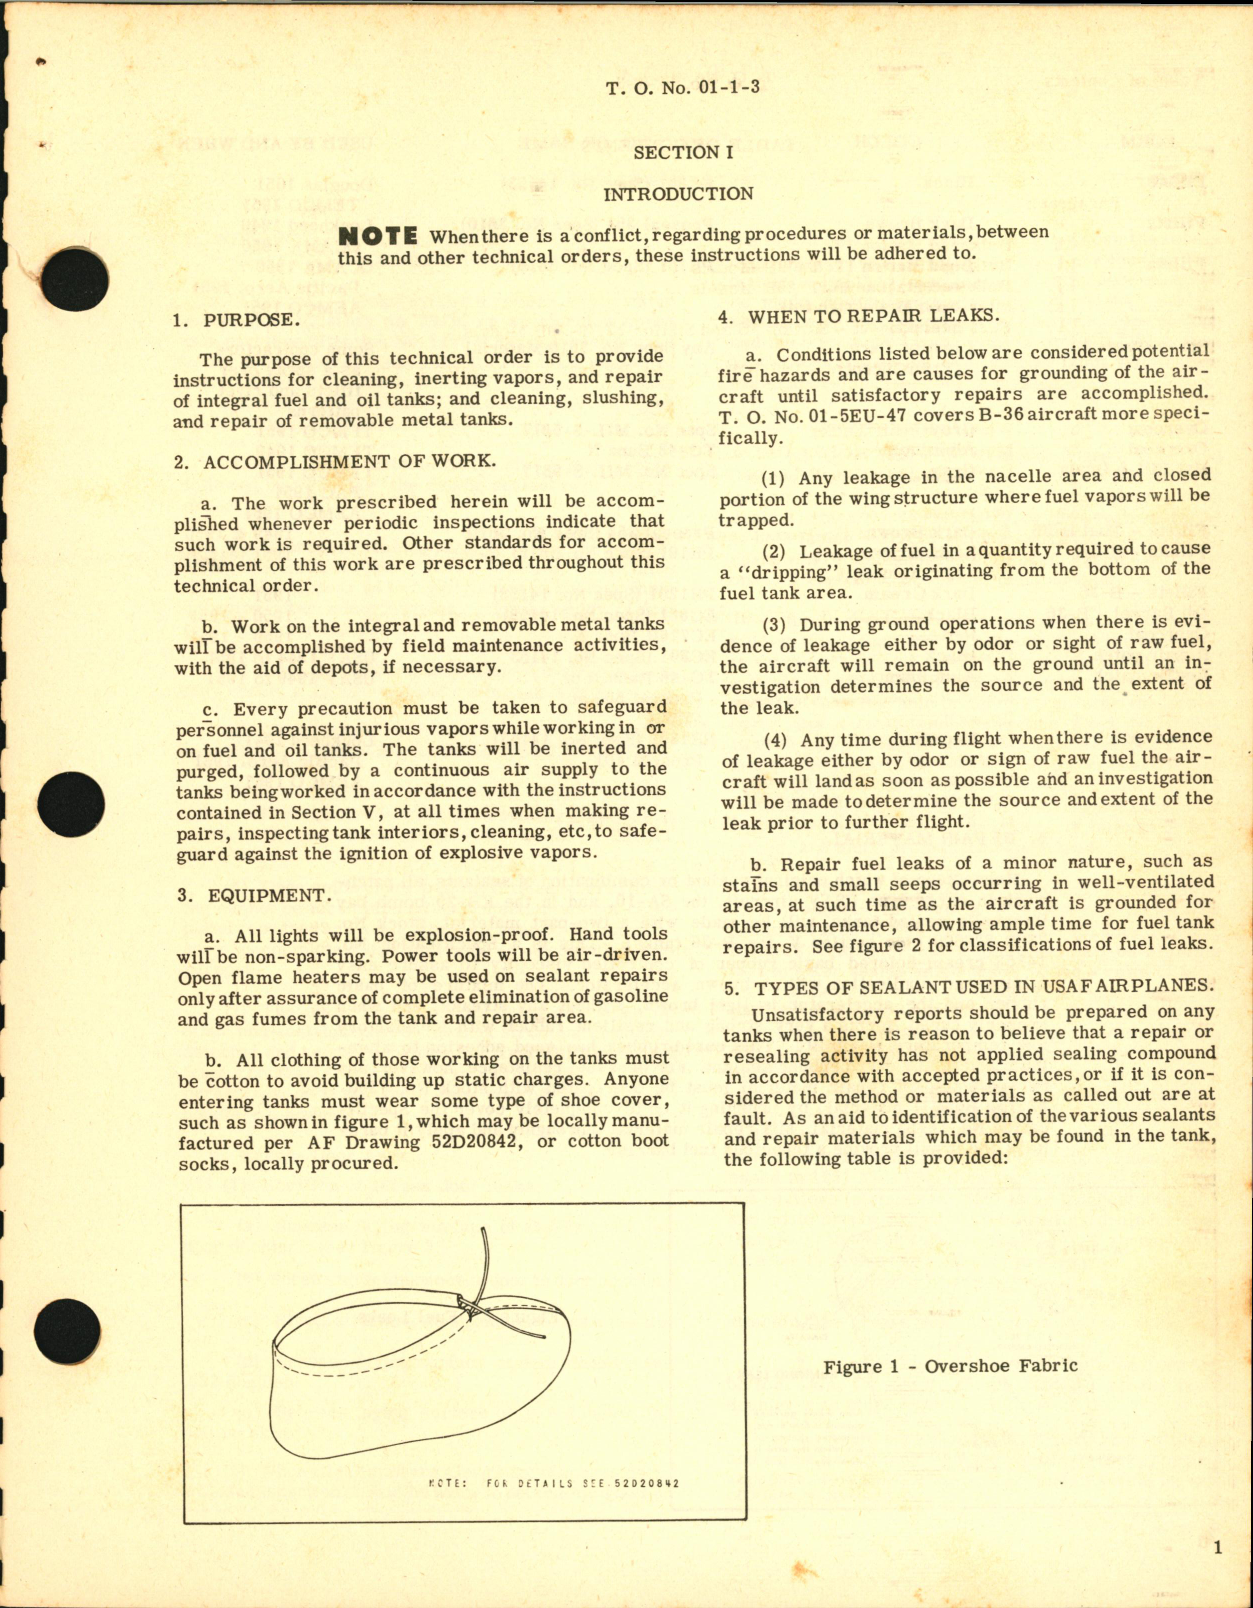 Sample page  5 from AirCorps Library document: Repair of Integral & Removable Metal Fuel & Oil Tanks - 01-1-3